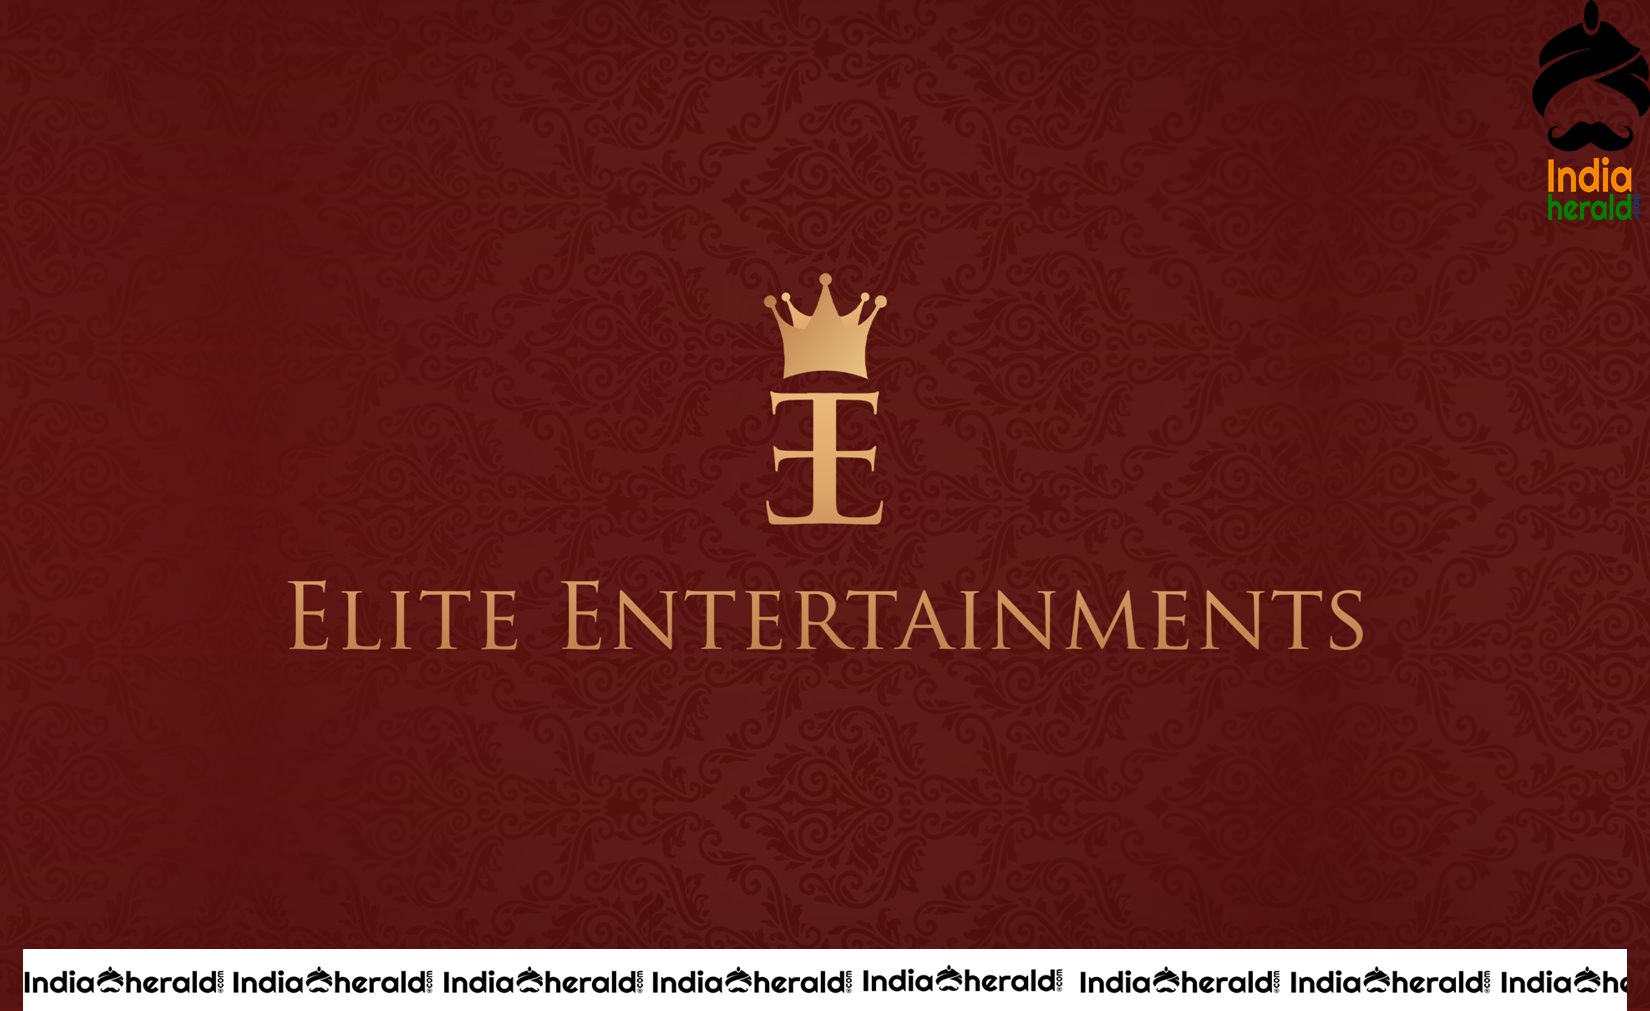 Elite Entertainments promises to Produce Successful Movies